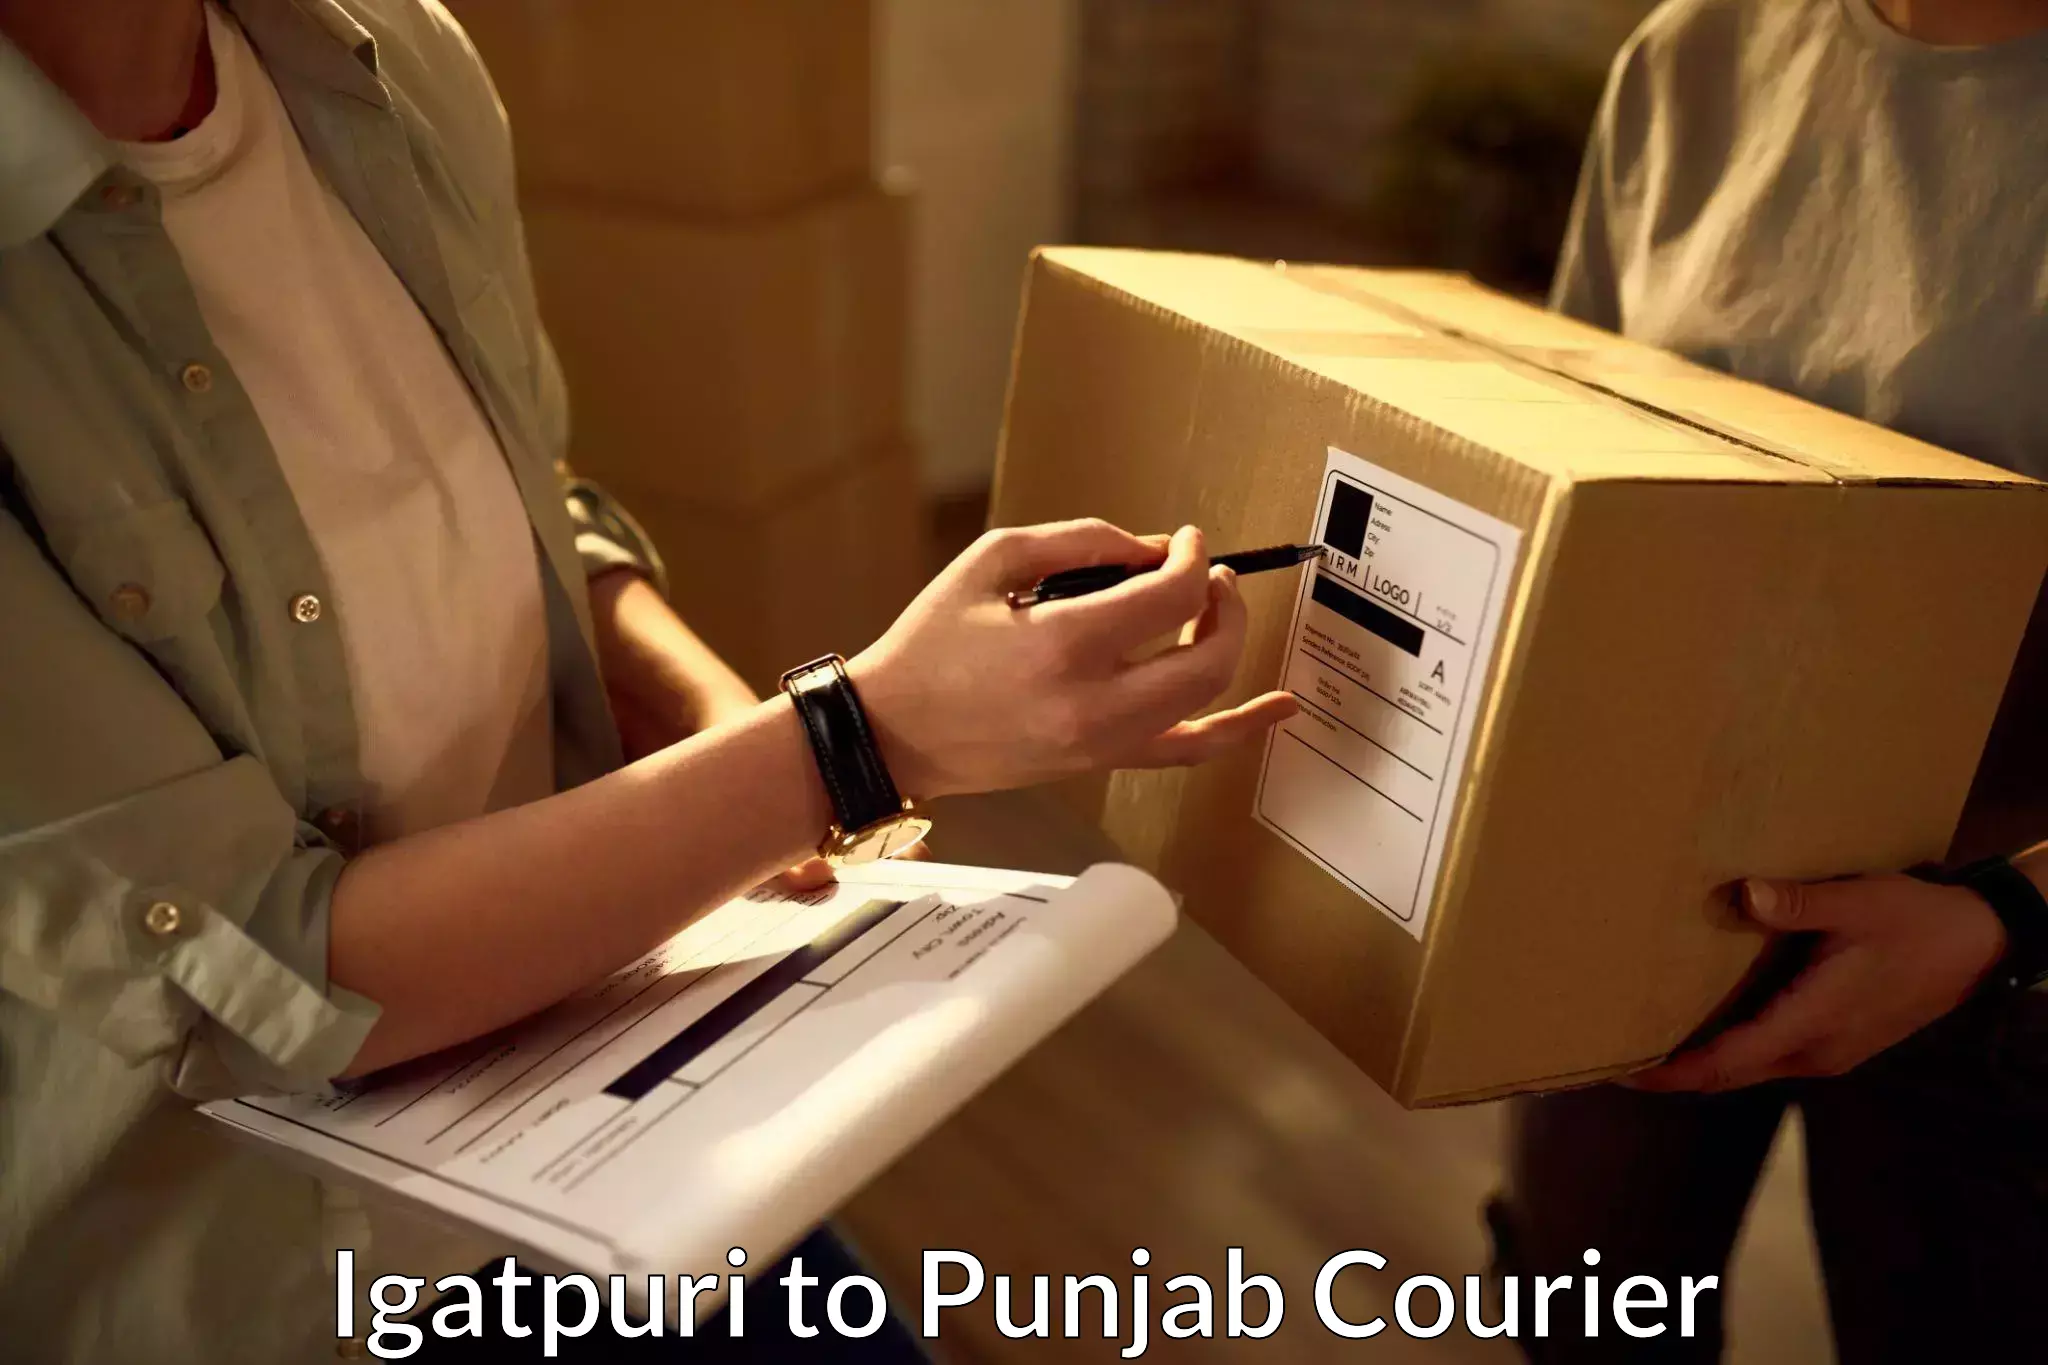 Wholesale parcel delivery Igatpuri to Mohali